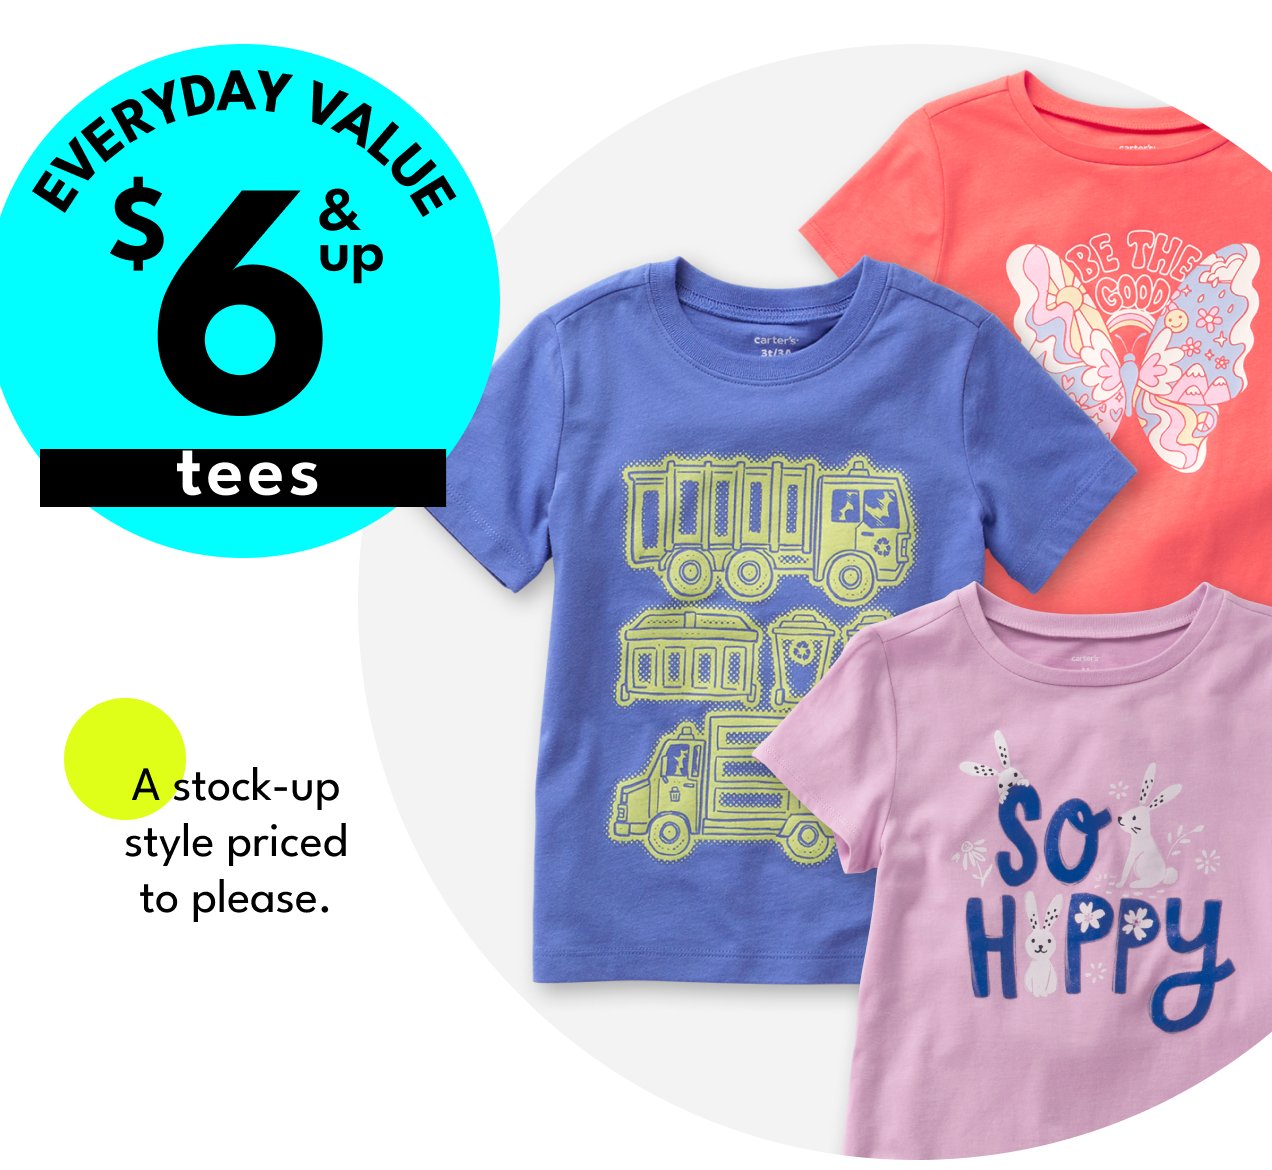 EVERYDAY VALUE | \\$6 & up tees | A stock-up style priced to please